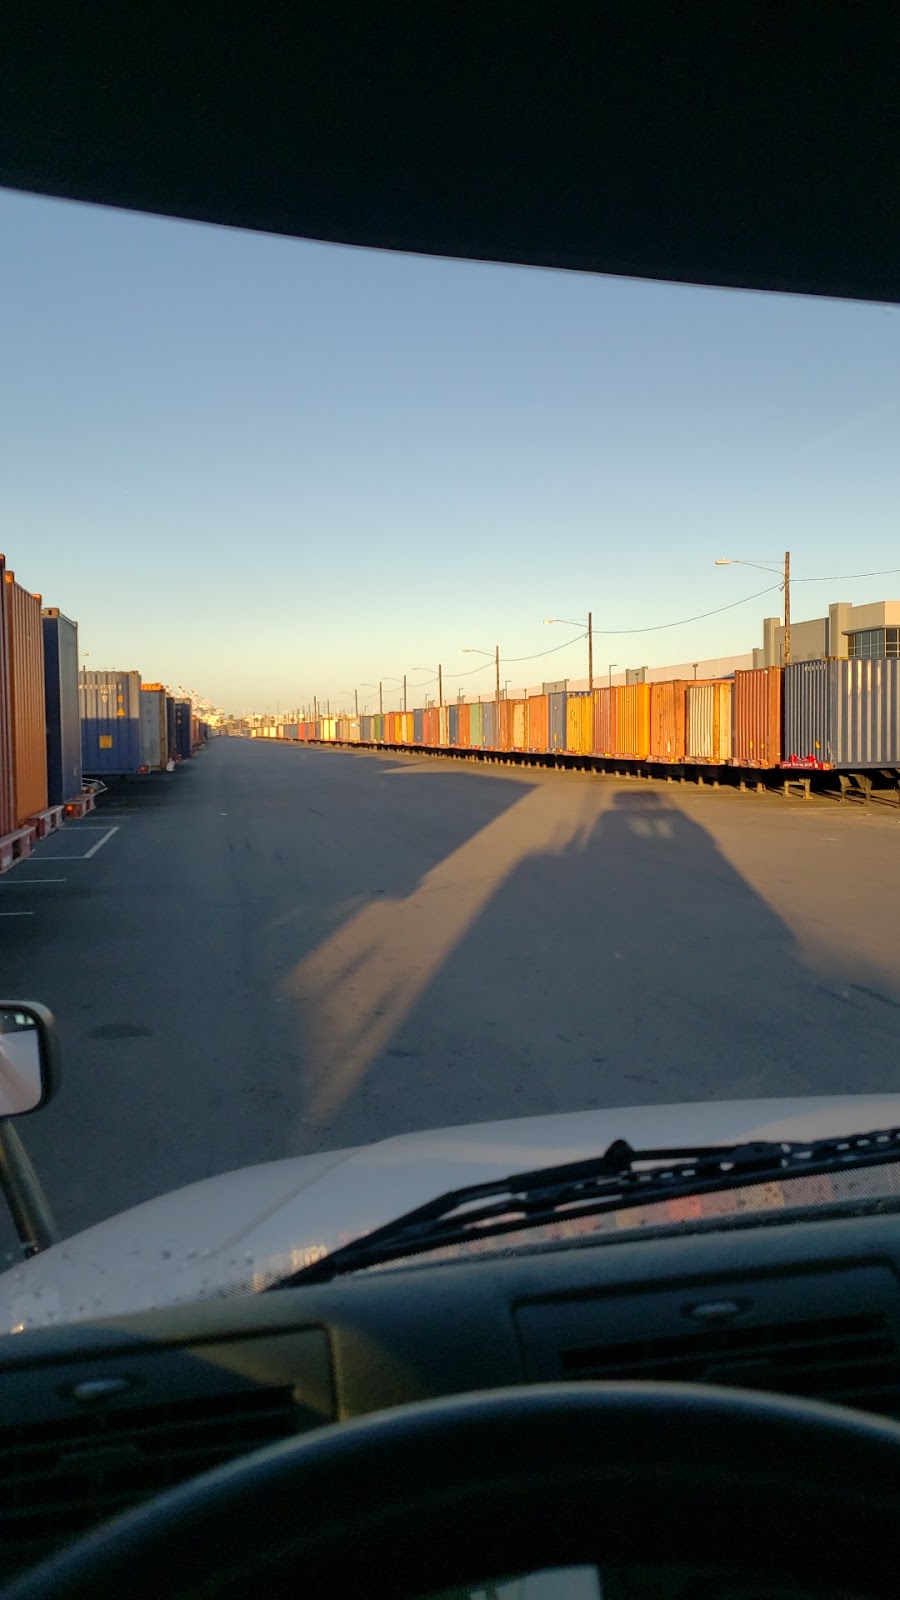 Shippers Transport Express | 2441 W 14th St, Oakland, CA 94607 | Phone: (510) 836-8781